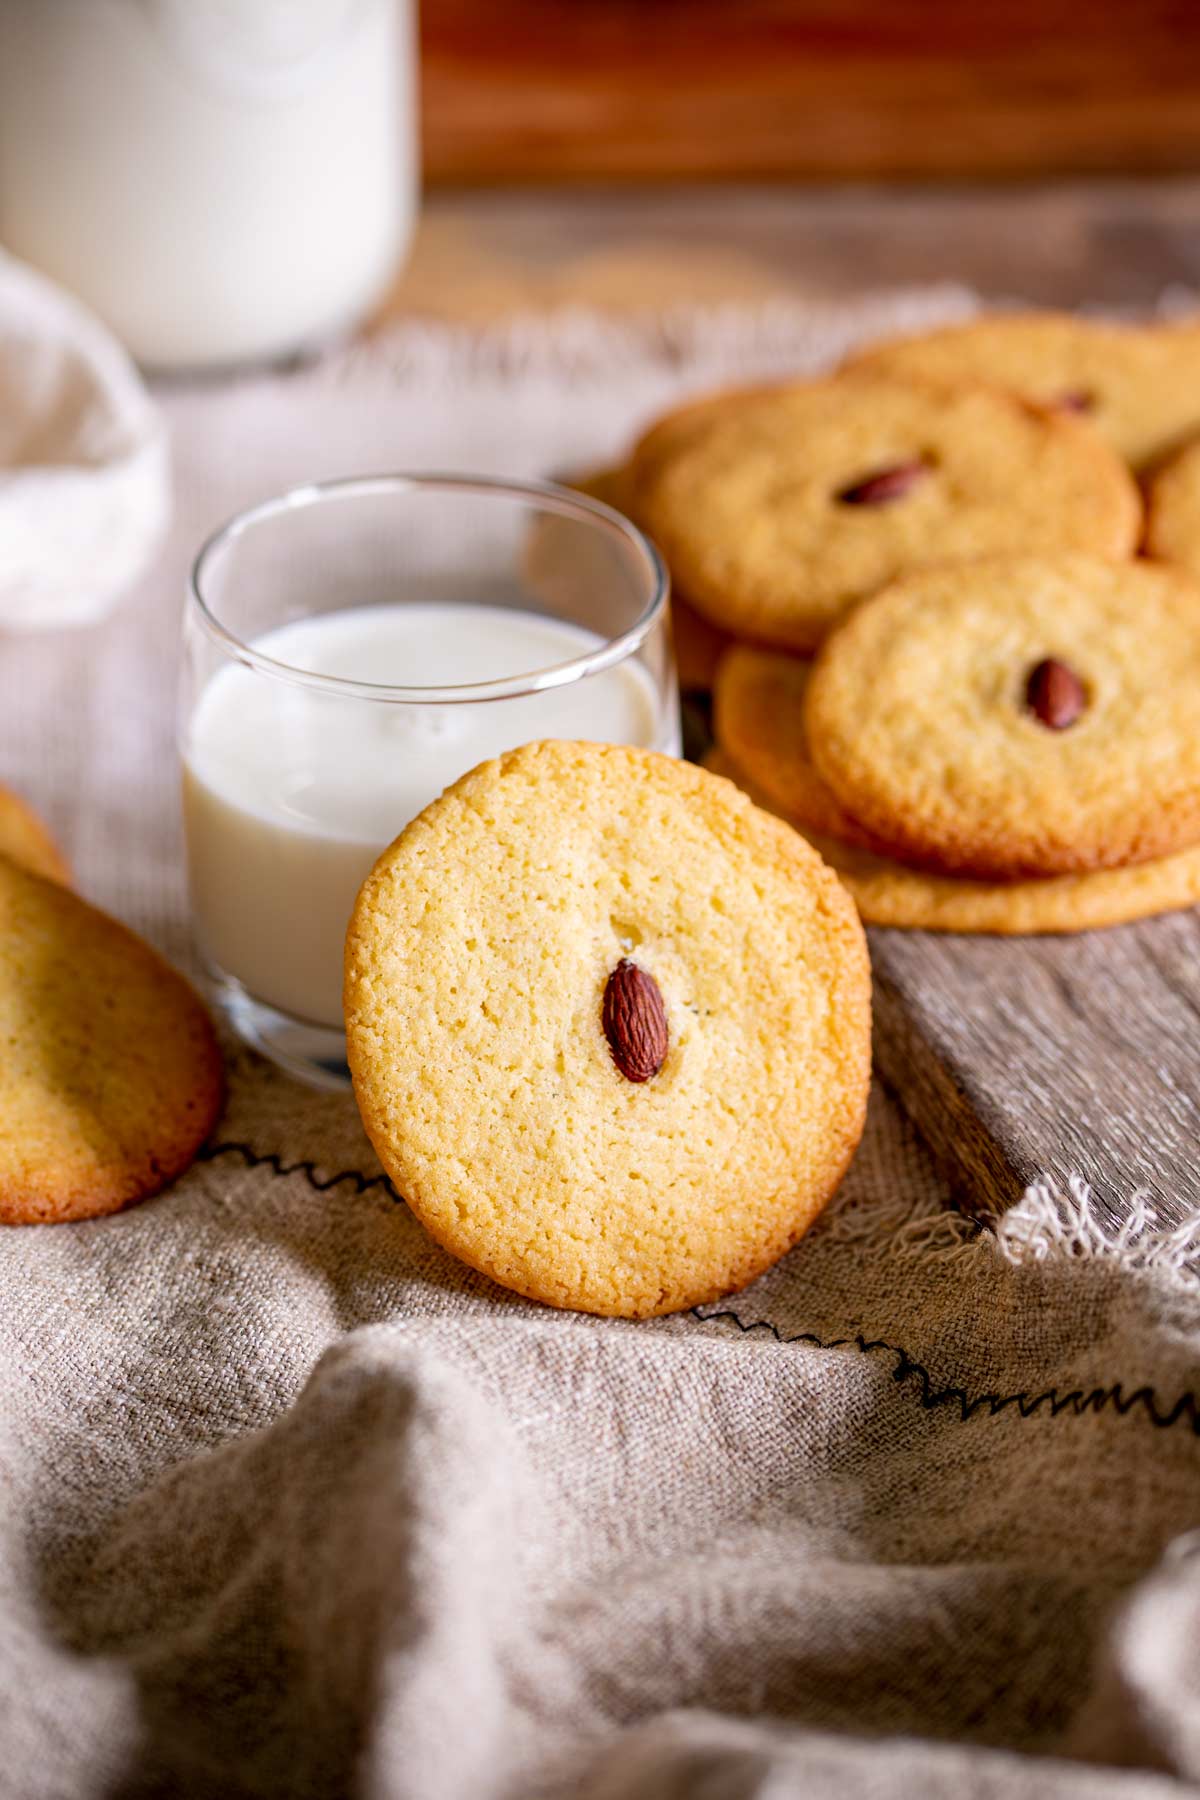 a cookie leaning against a glass of milk